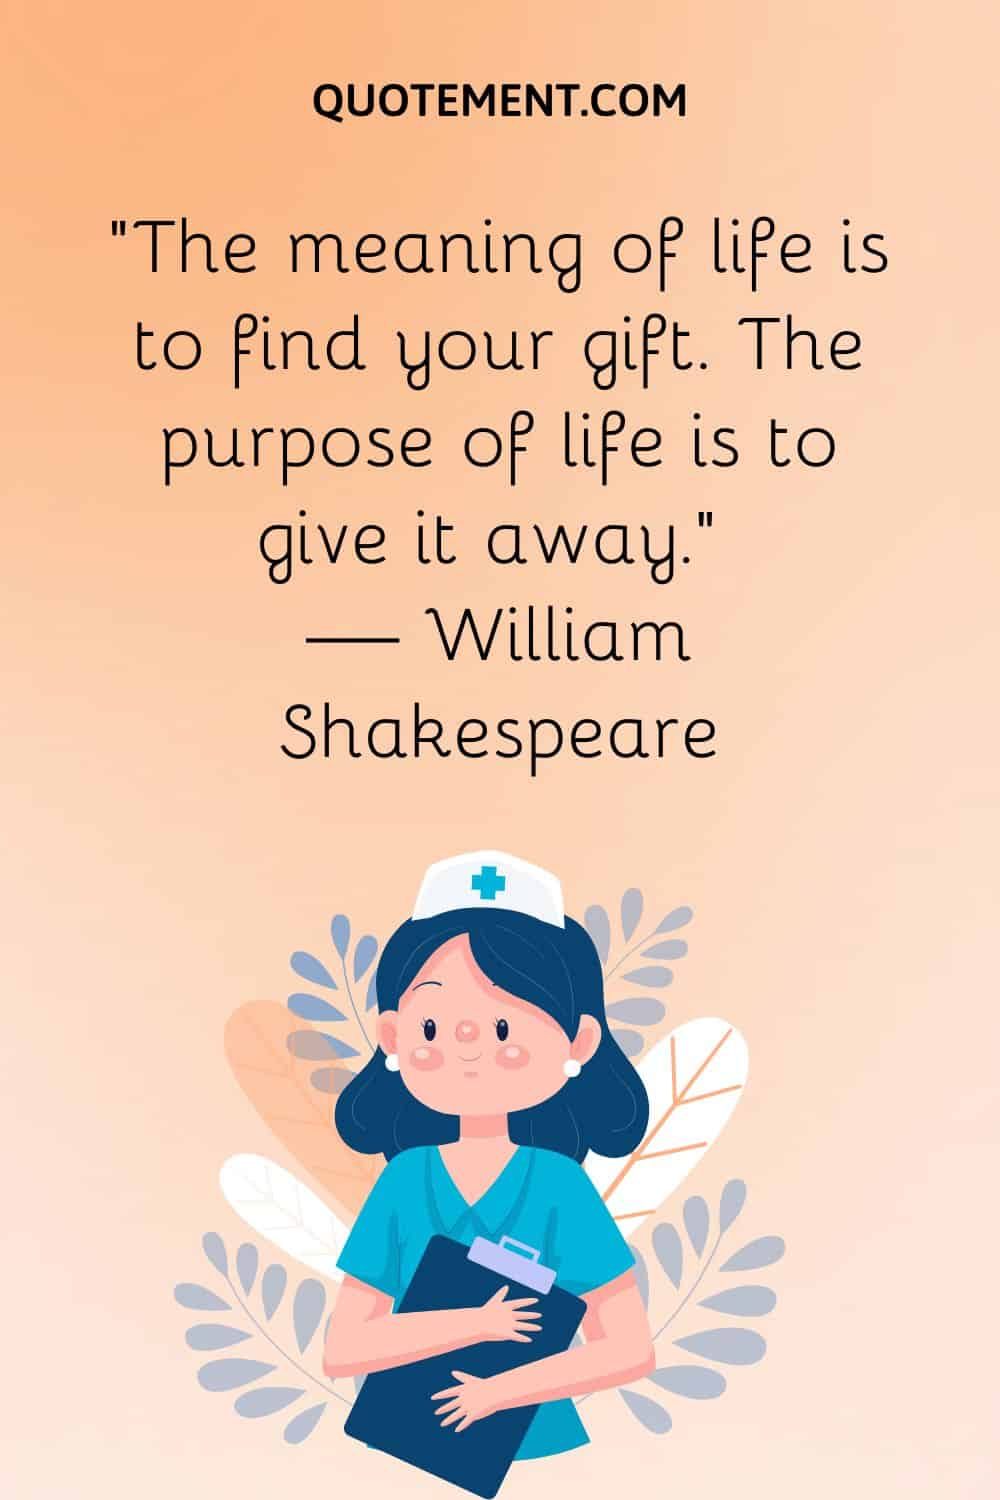 “The meaning of life is to find your gift. The purpose of life is to give it away.” — William Shakespeare